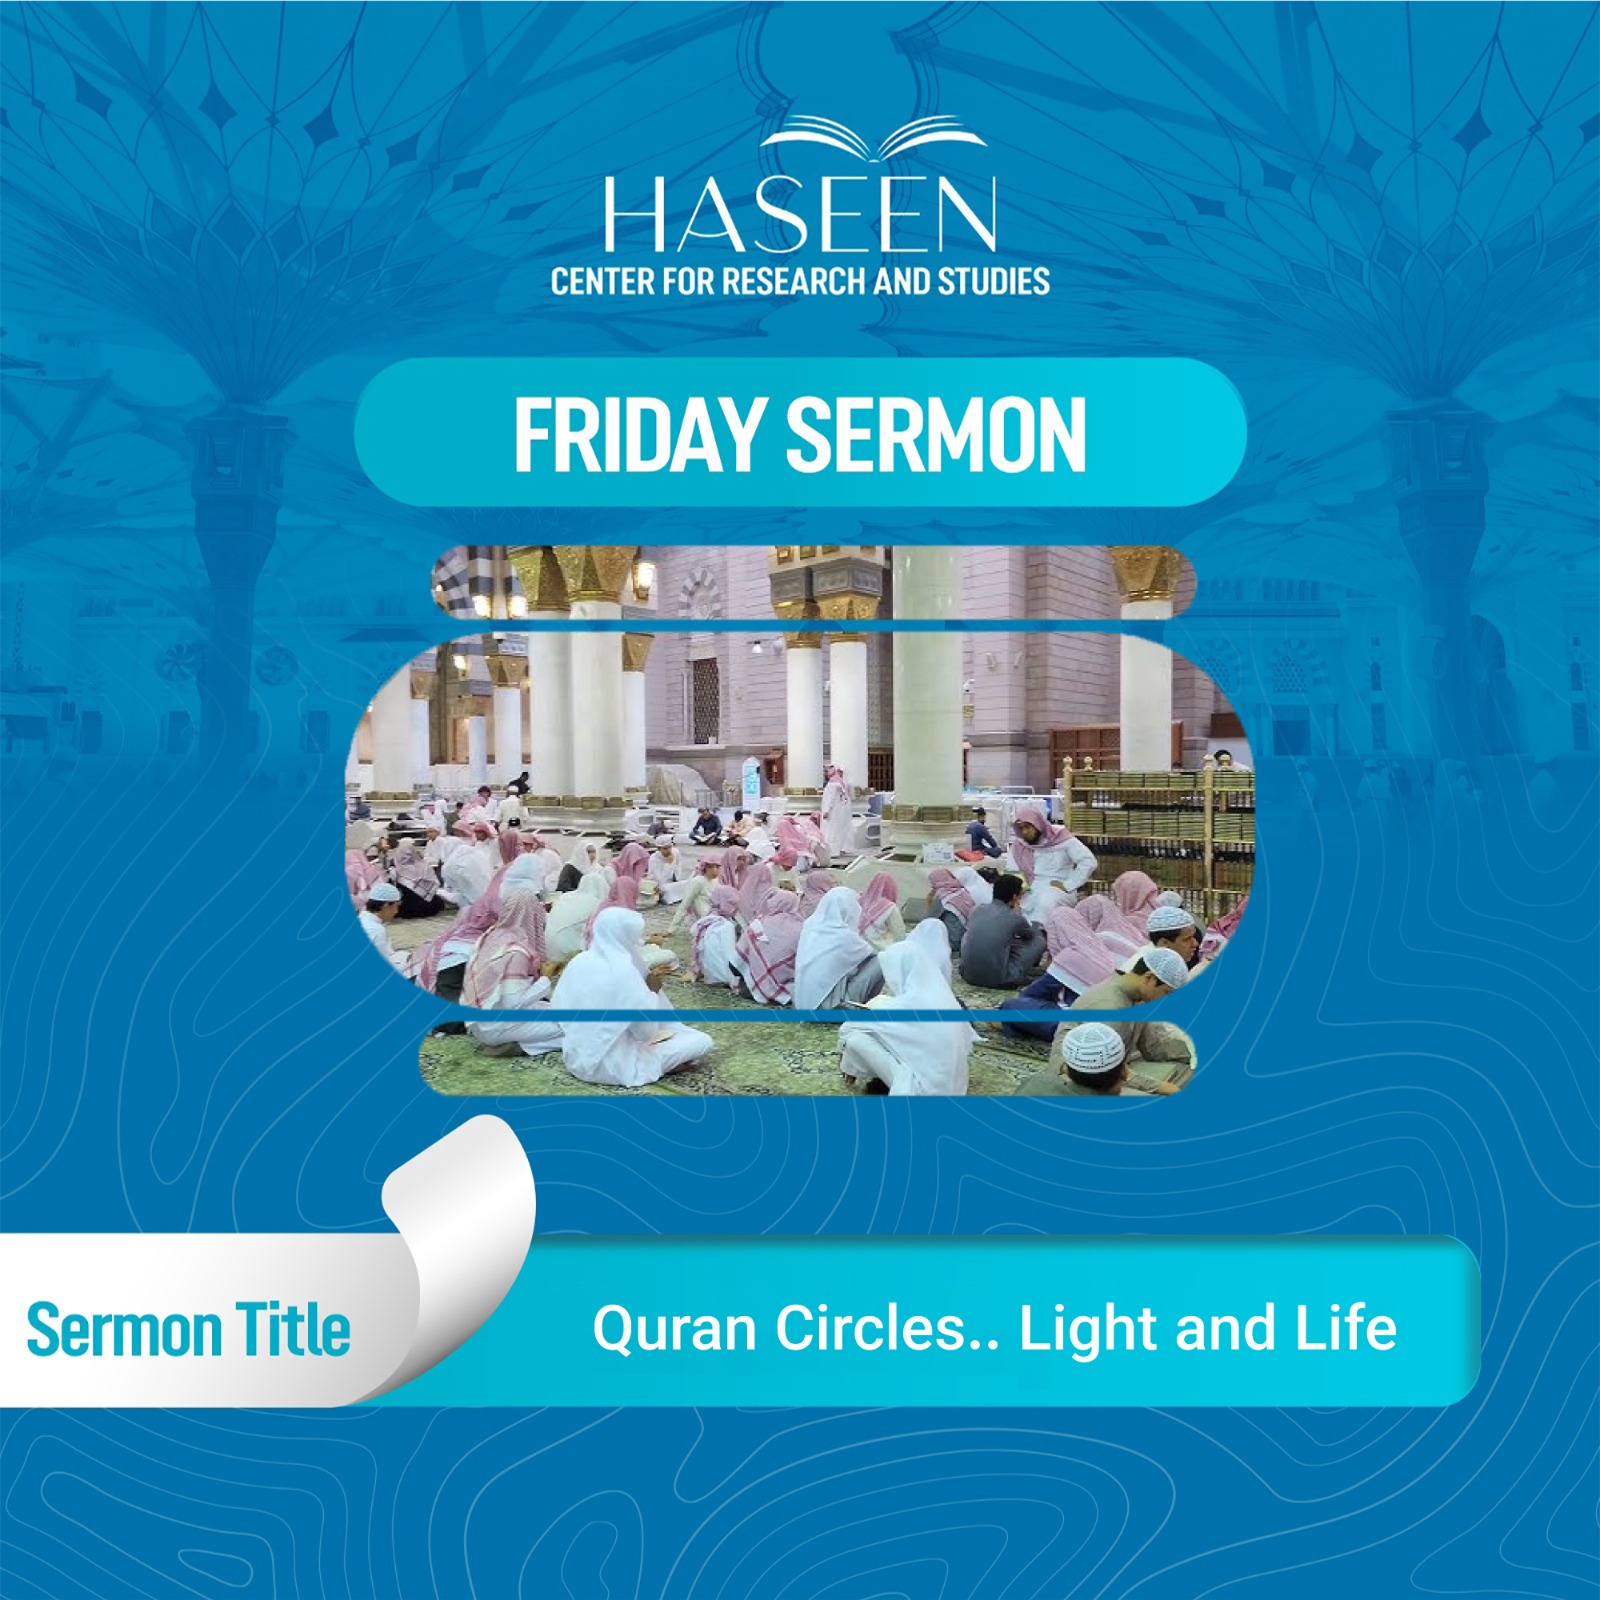 Title of the Sermon: Quran Circles.. Light and Life